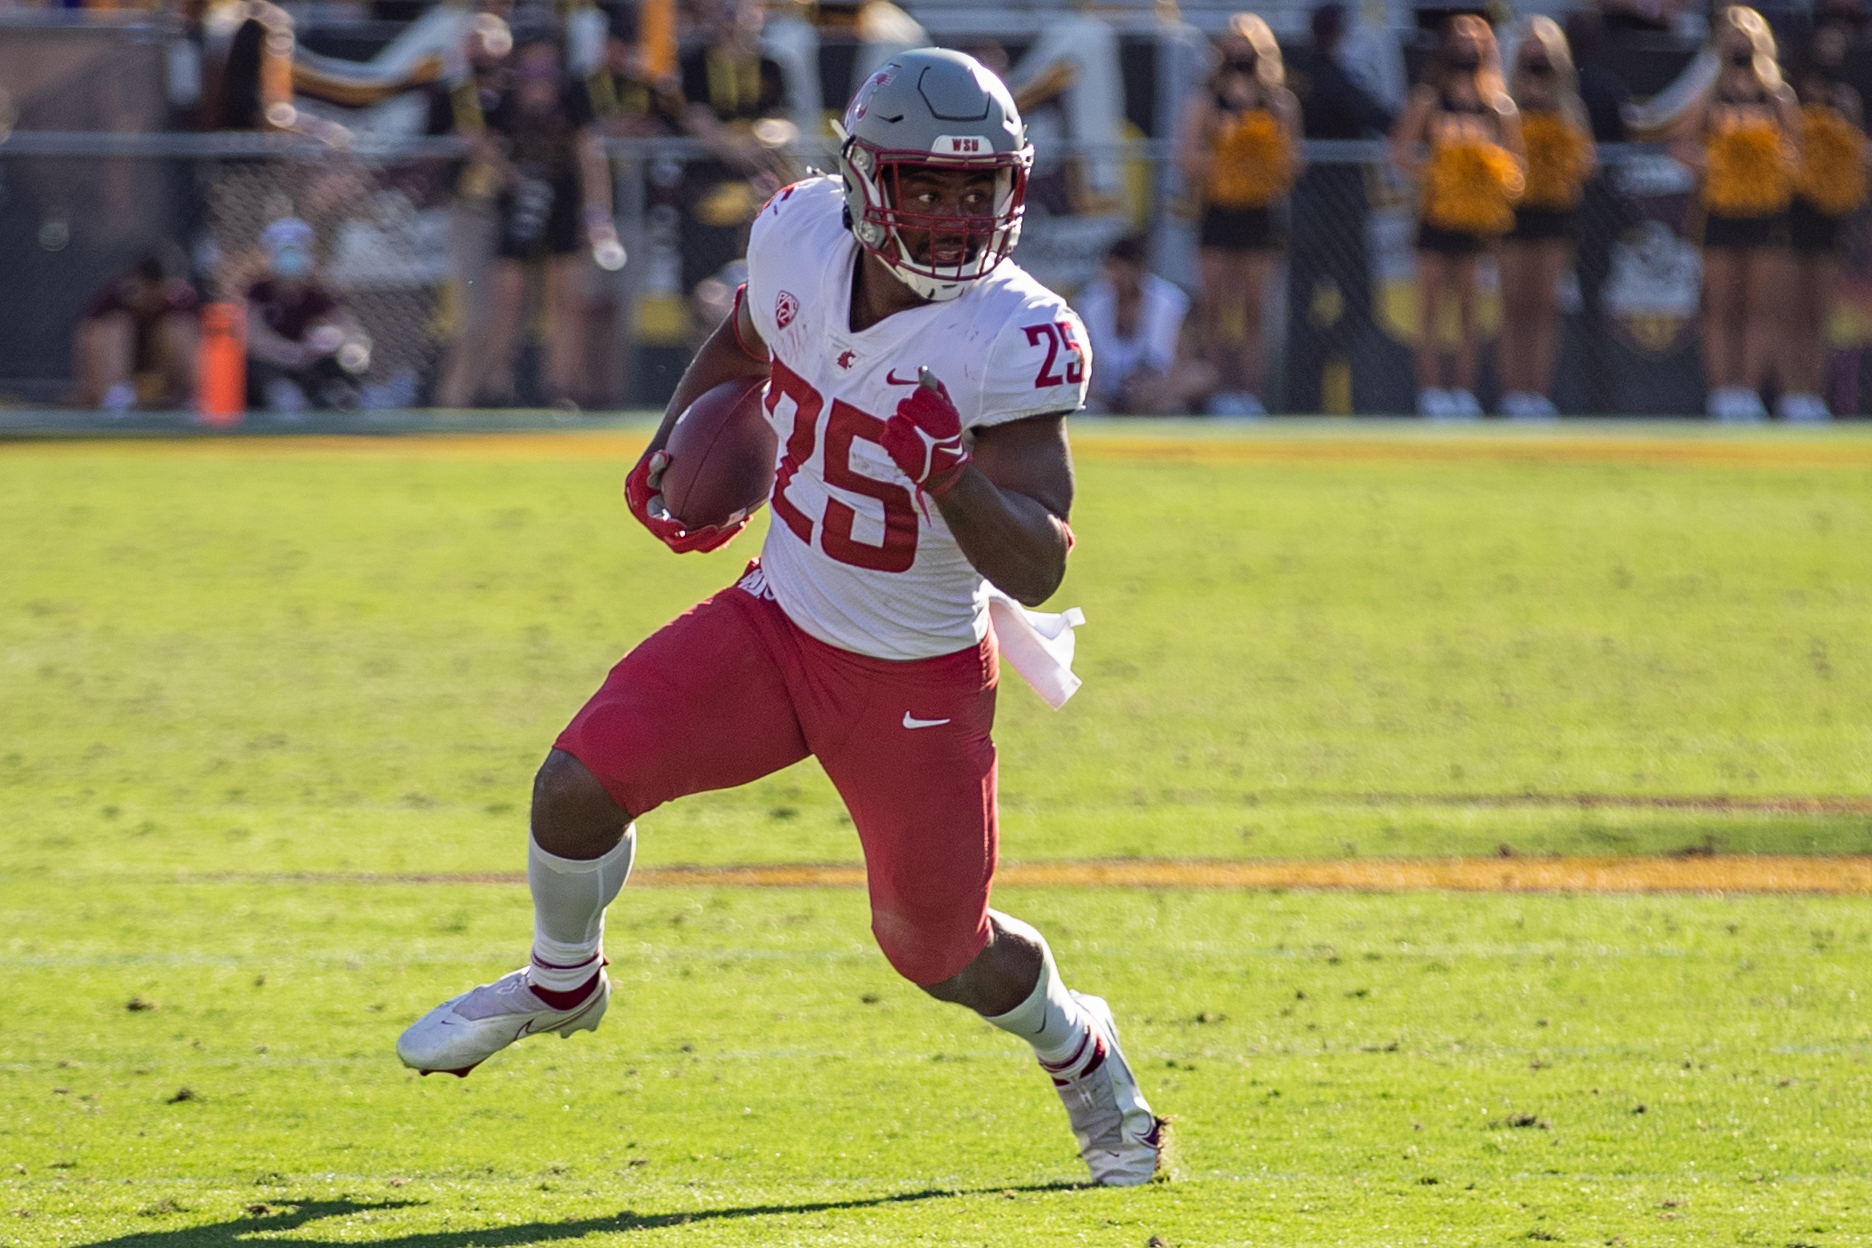 TEMPE, AZ - OCTOBER 30: Washington State running back Nakia Watson (25) runs in open space during the second half of a PAC 12 conference matchup between the Arizona State Sun Devils and the Washington State Cougars on October 30, 2021, at Sun Devil Stadium in Tempe, AZ.